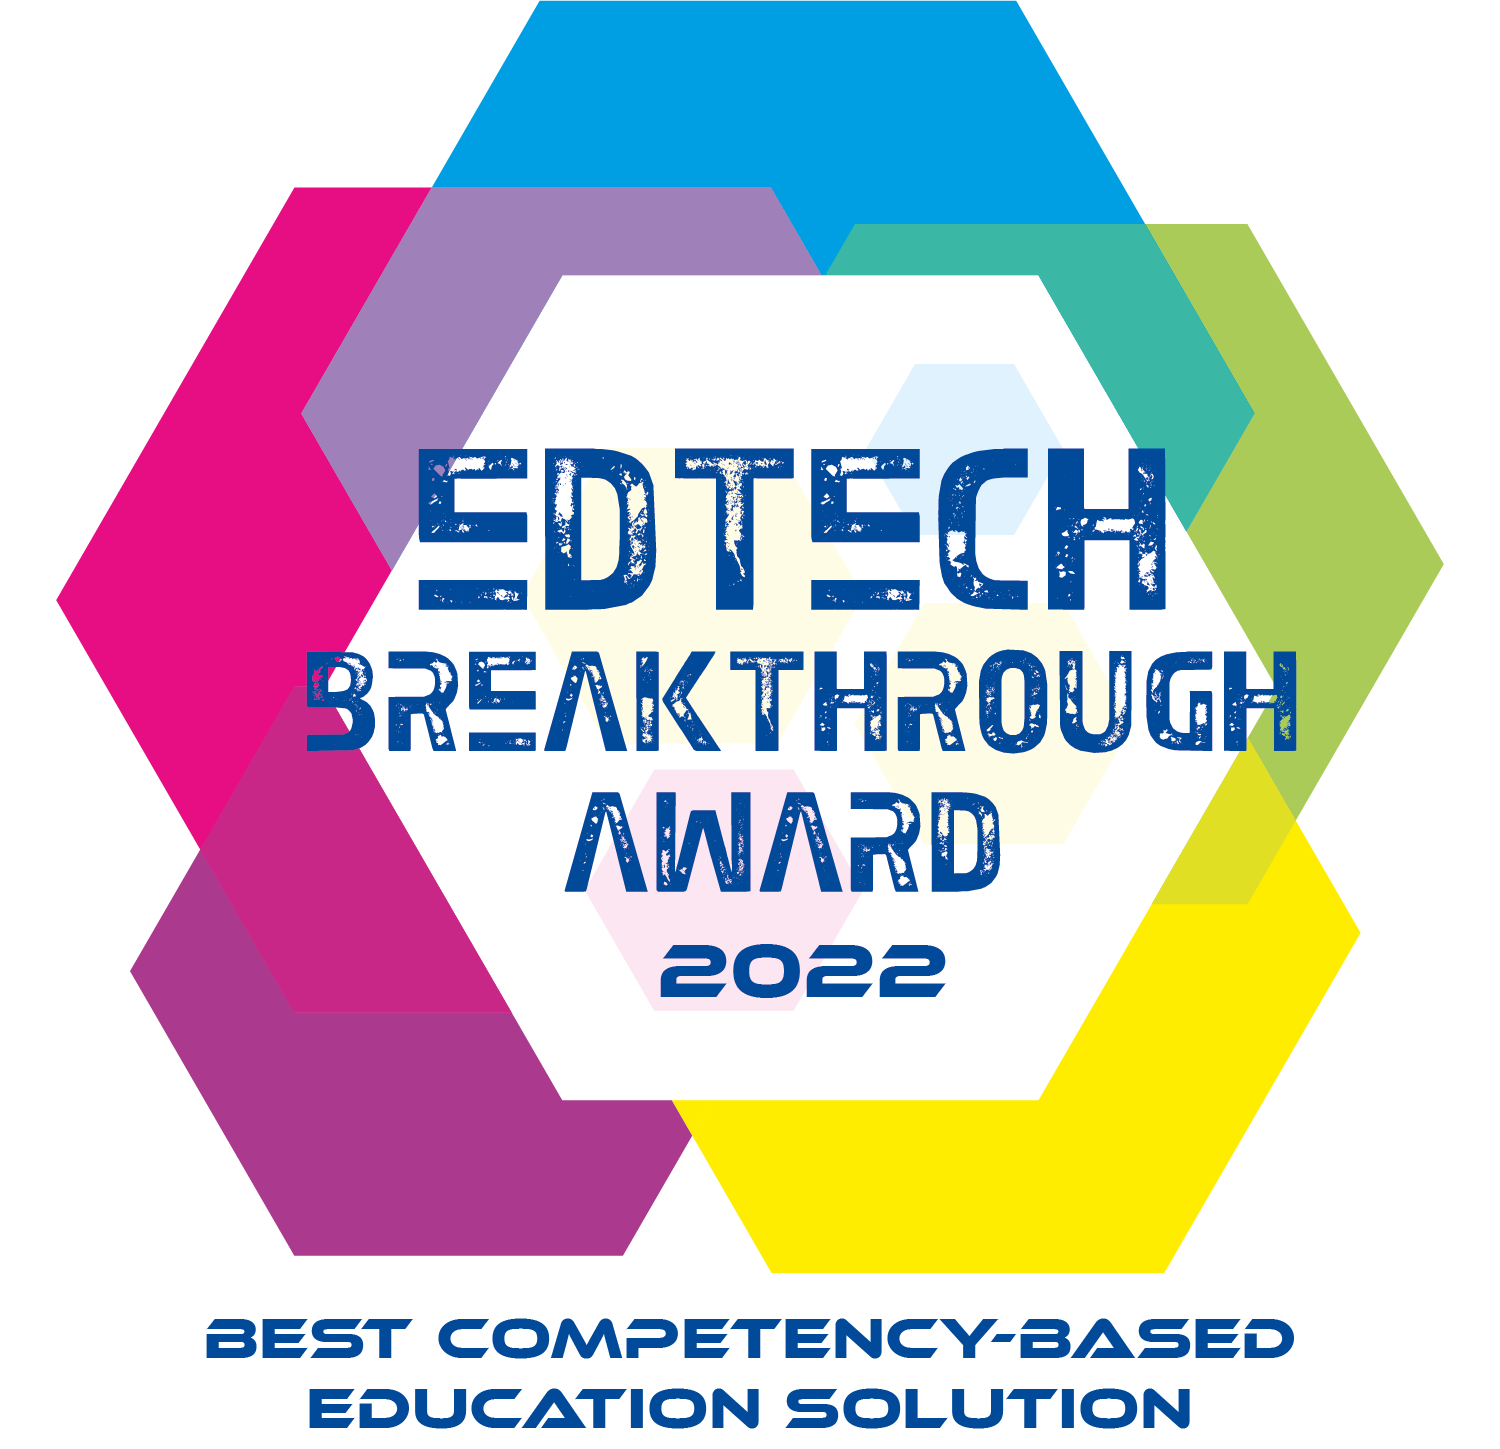 MagicBox is the “Best Competency-based Education Solution” by 2022 Edtech Breakthrough Awards